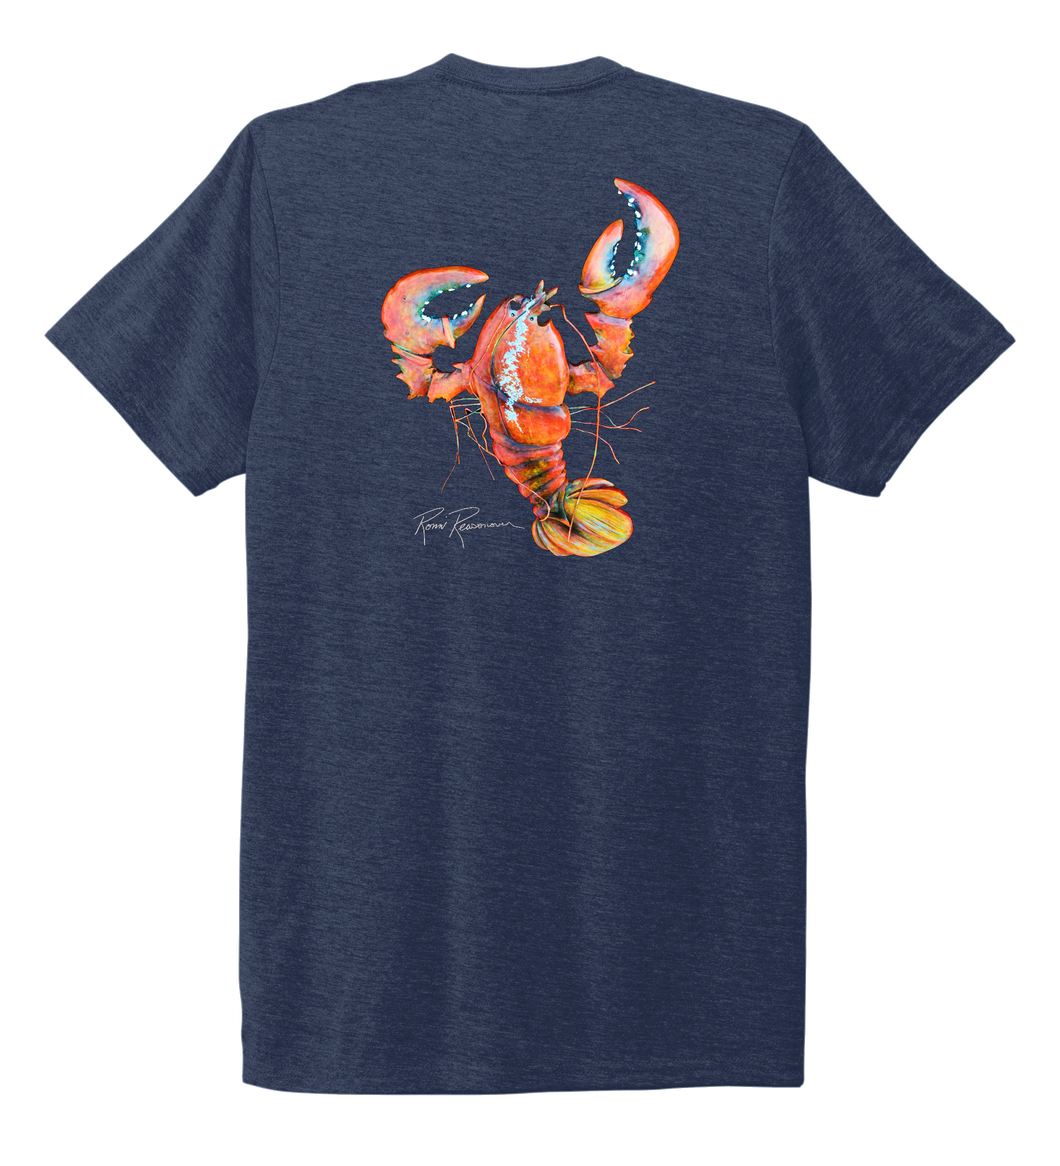 Ronnie Reasonover, The Lobster, Crew Neck T-Shirt in Deep Sea Blue